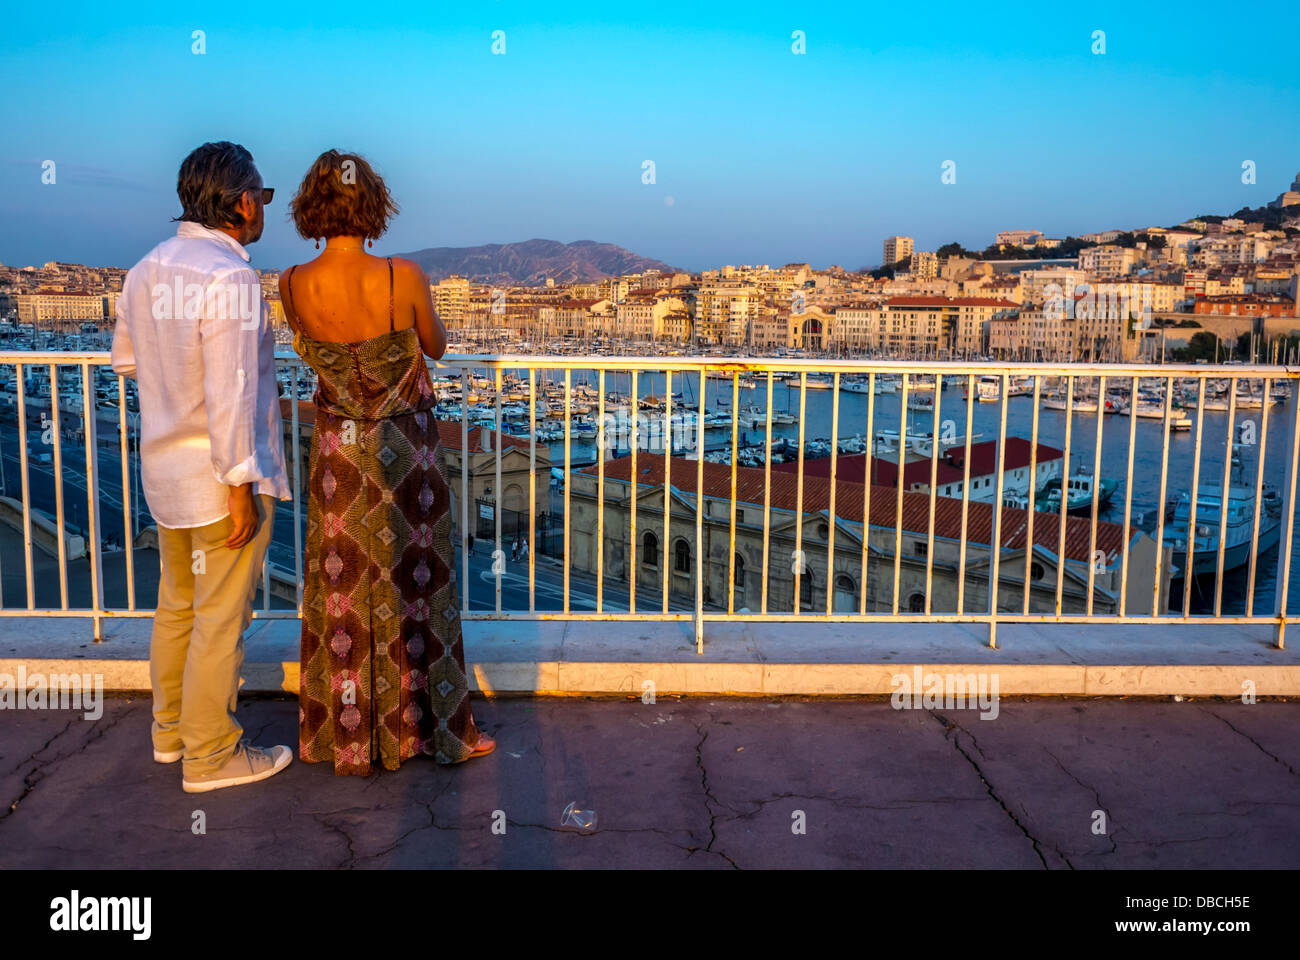 Marseille France, Tourist Couple, Rear, Visiting Romantic Cityscapes of 'Vieux Port' area, at Dusk, Old Port, Scenics, Woman Standing, Rear, Sunset Stock Photo